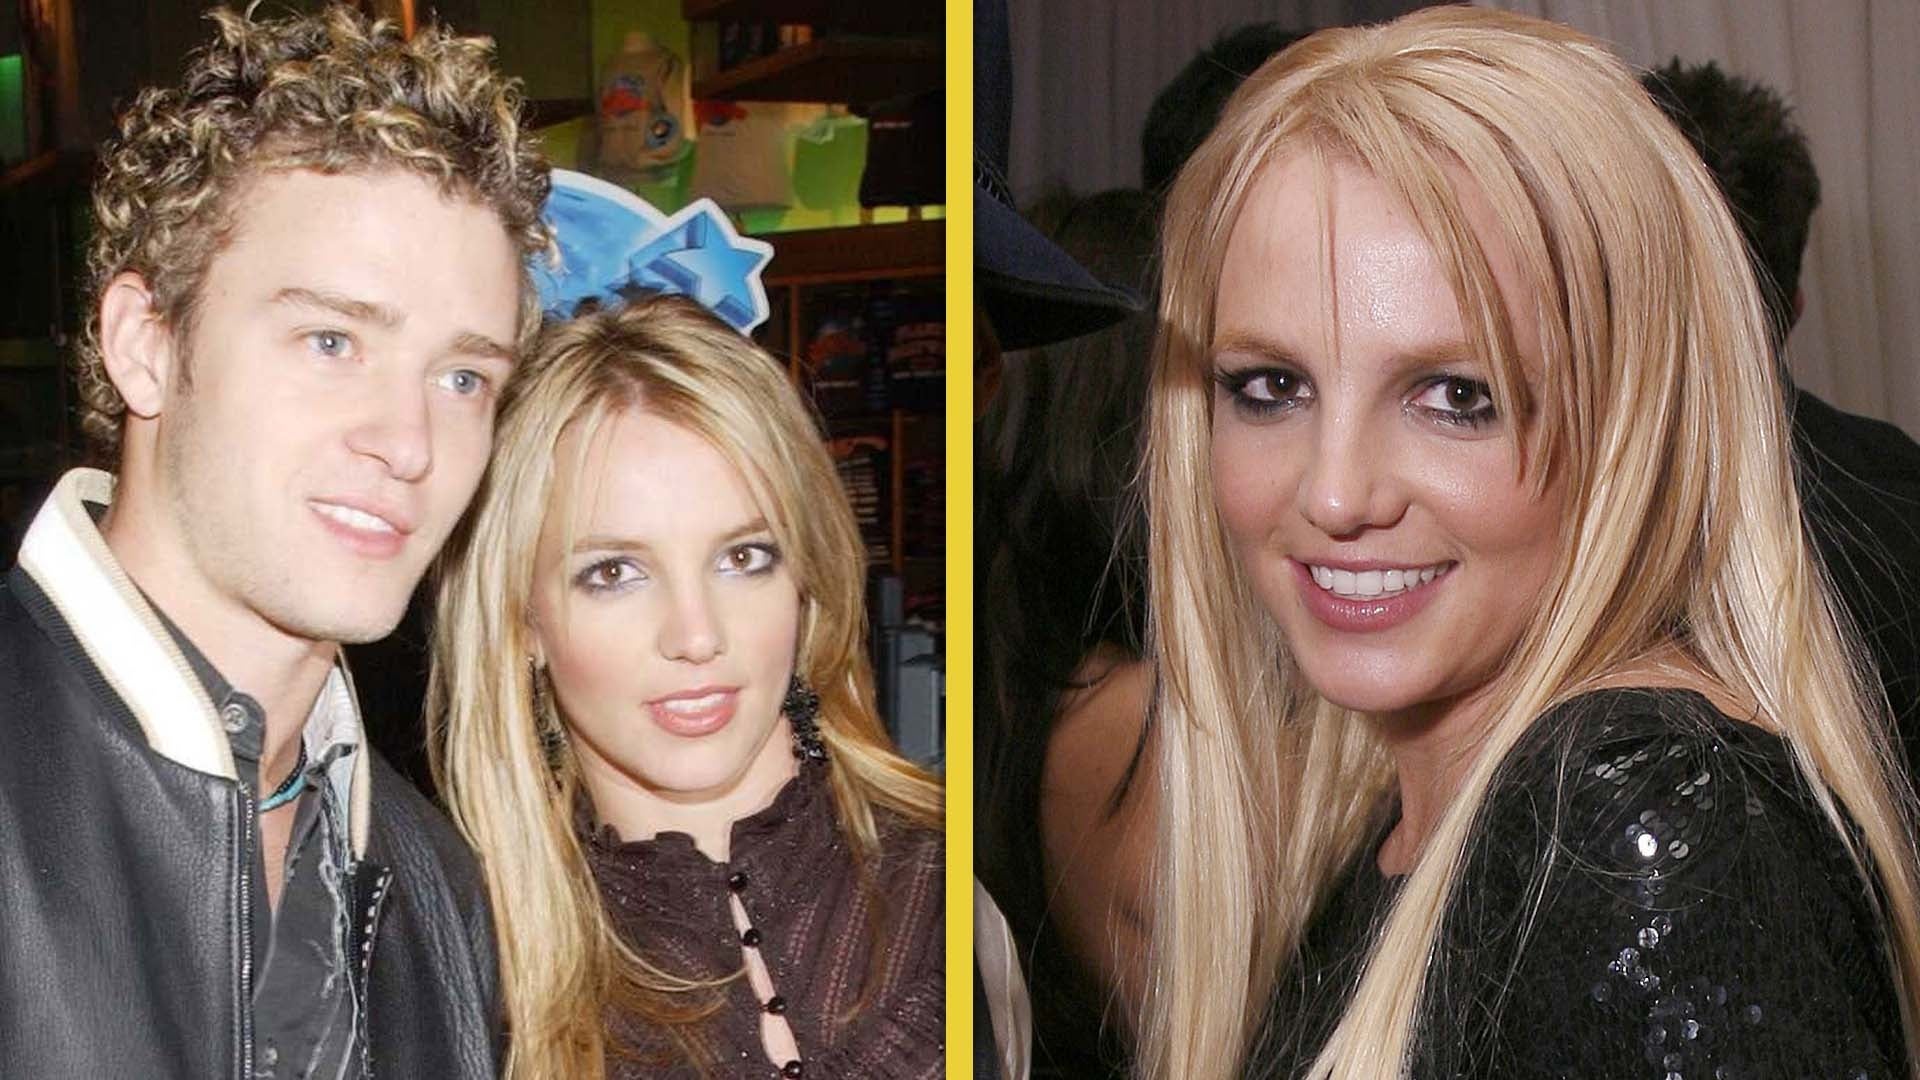 Britney Spears' Memoir: 5 Biggest Bombshells, From Justin Timberlake Breakup to '00s Party Days